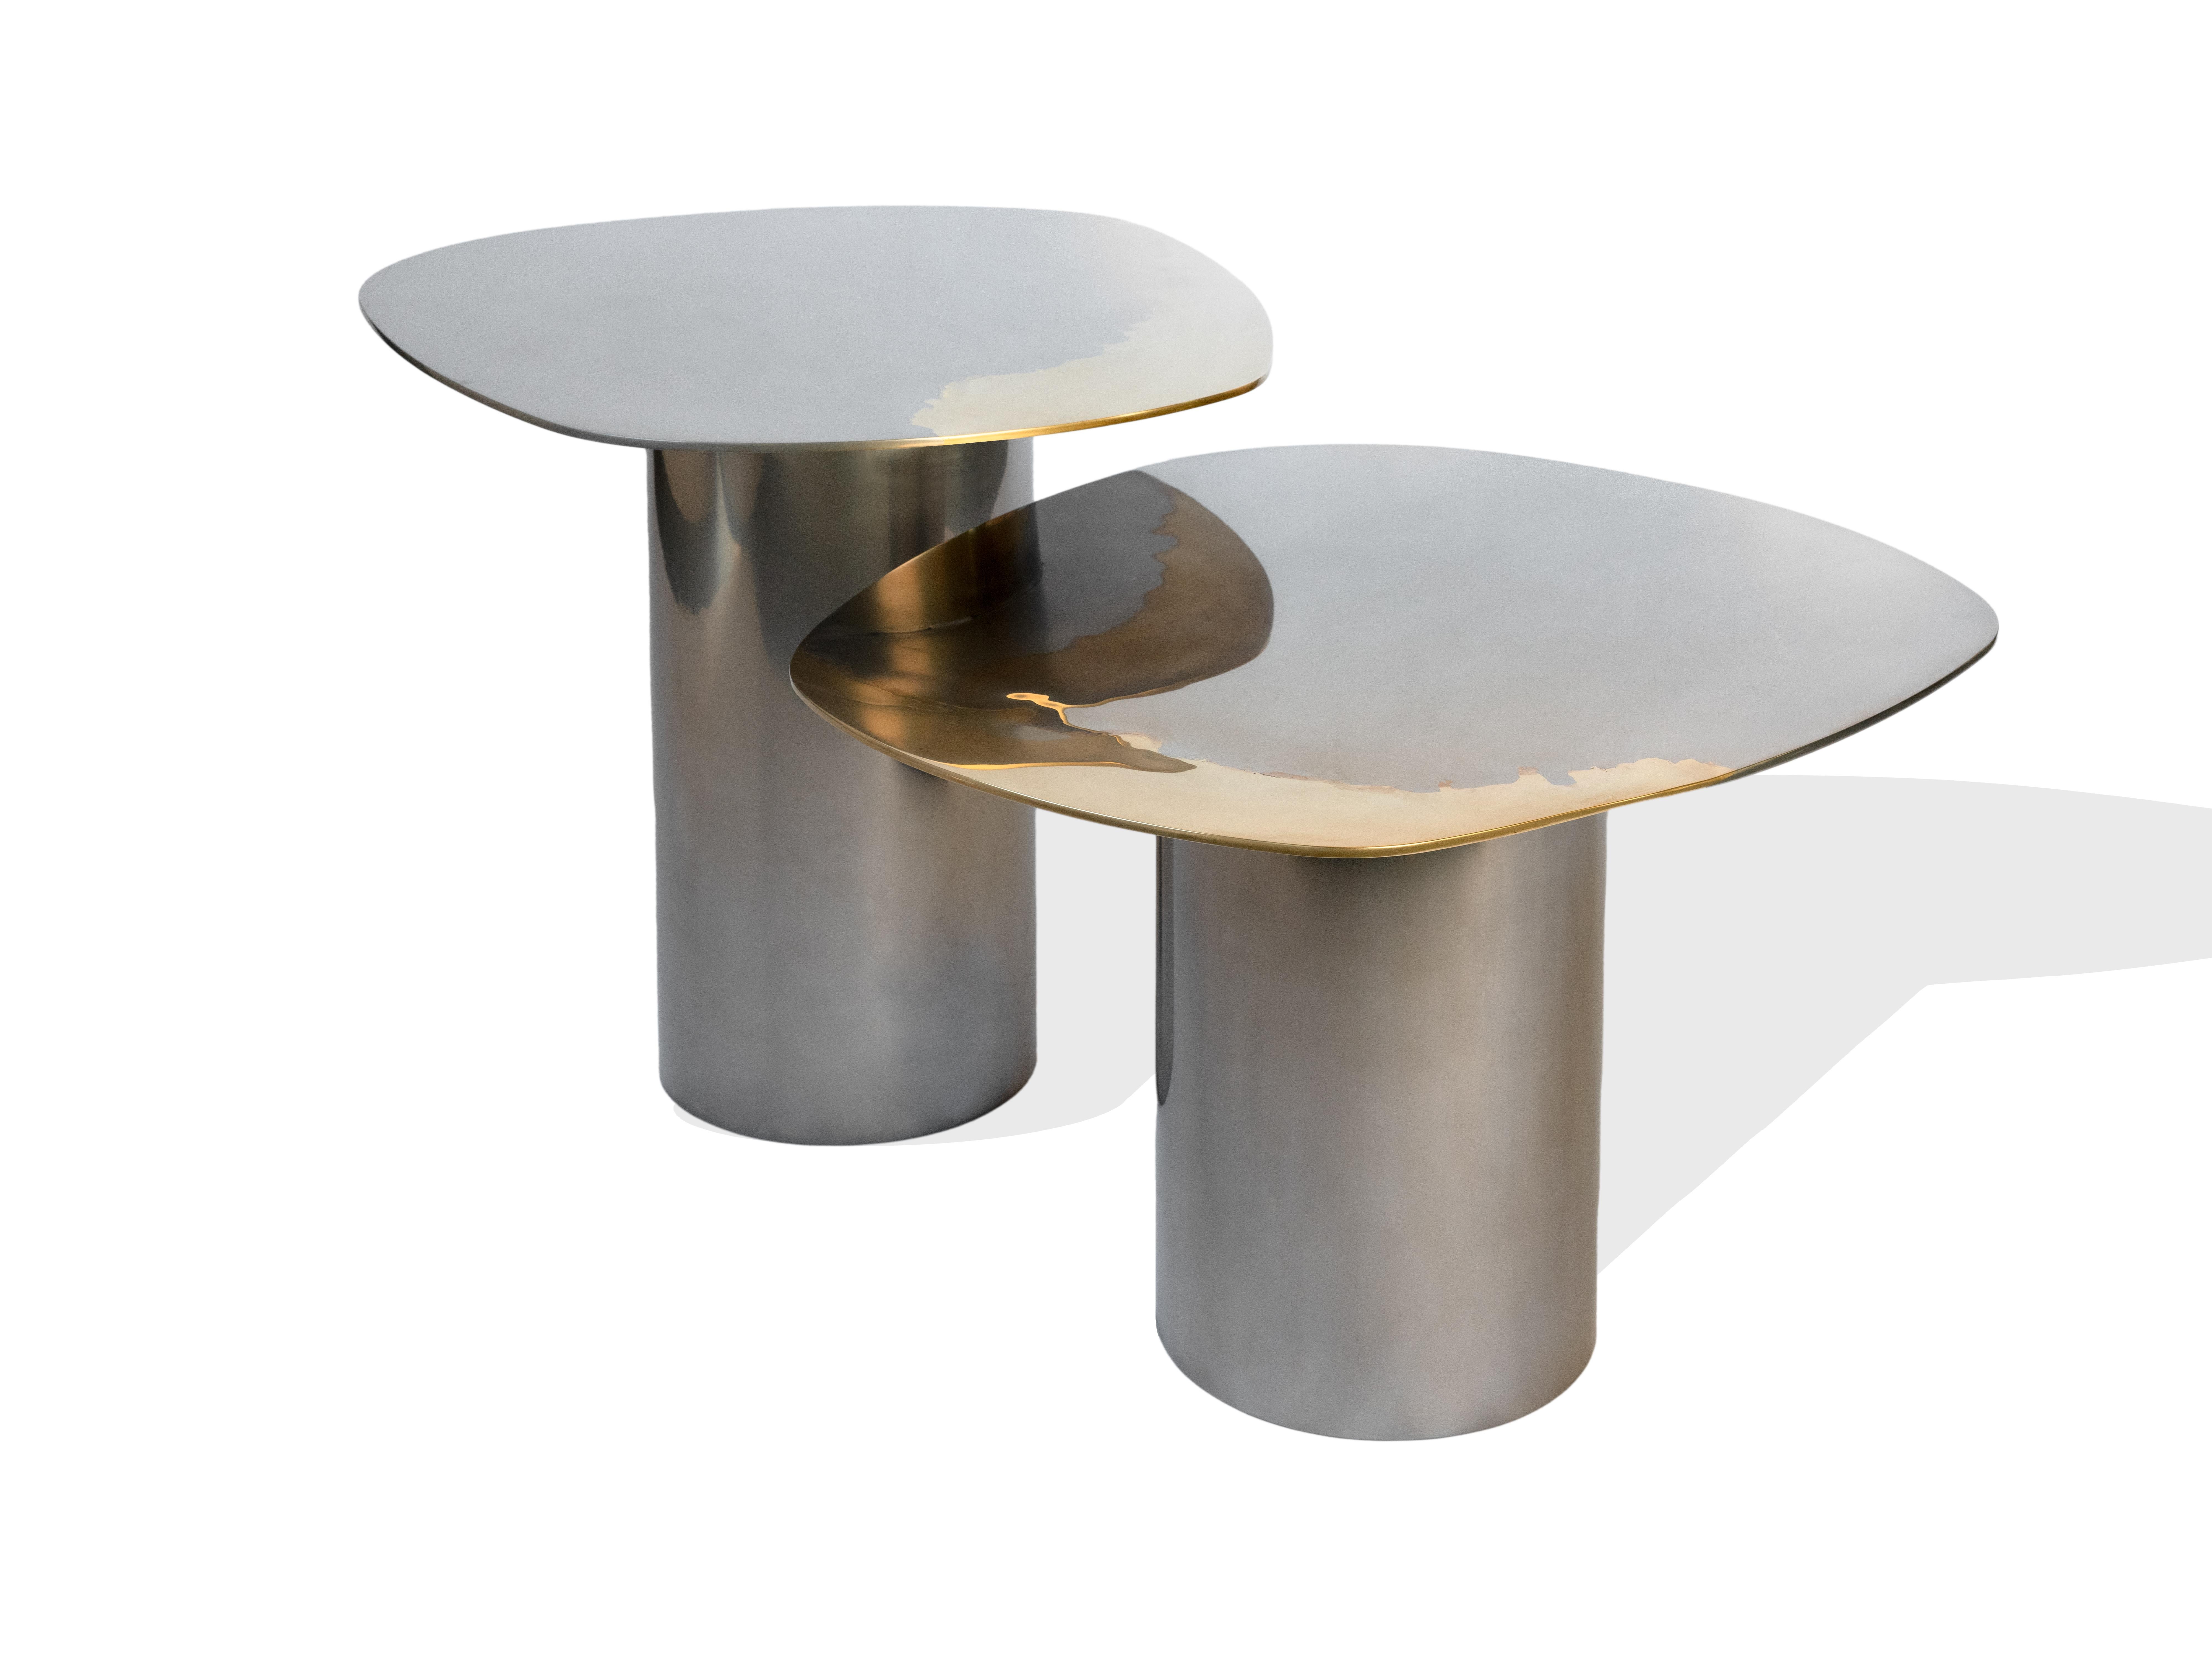 A set of Custom nesting tables as part of the Transition collection, featuring unique, artistic mirror polished tabletops, crafted from brass and stainless steel on tubular bases. 

Studio Warm has developed a distinctive, high-end, artistic